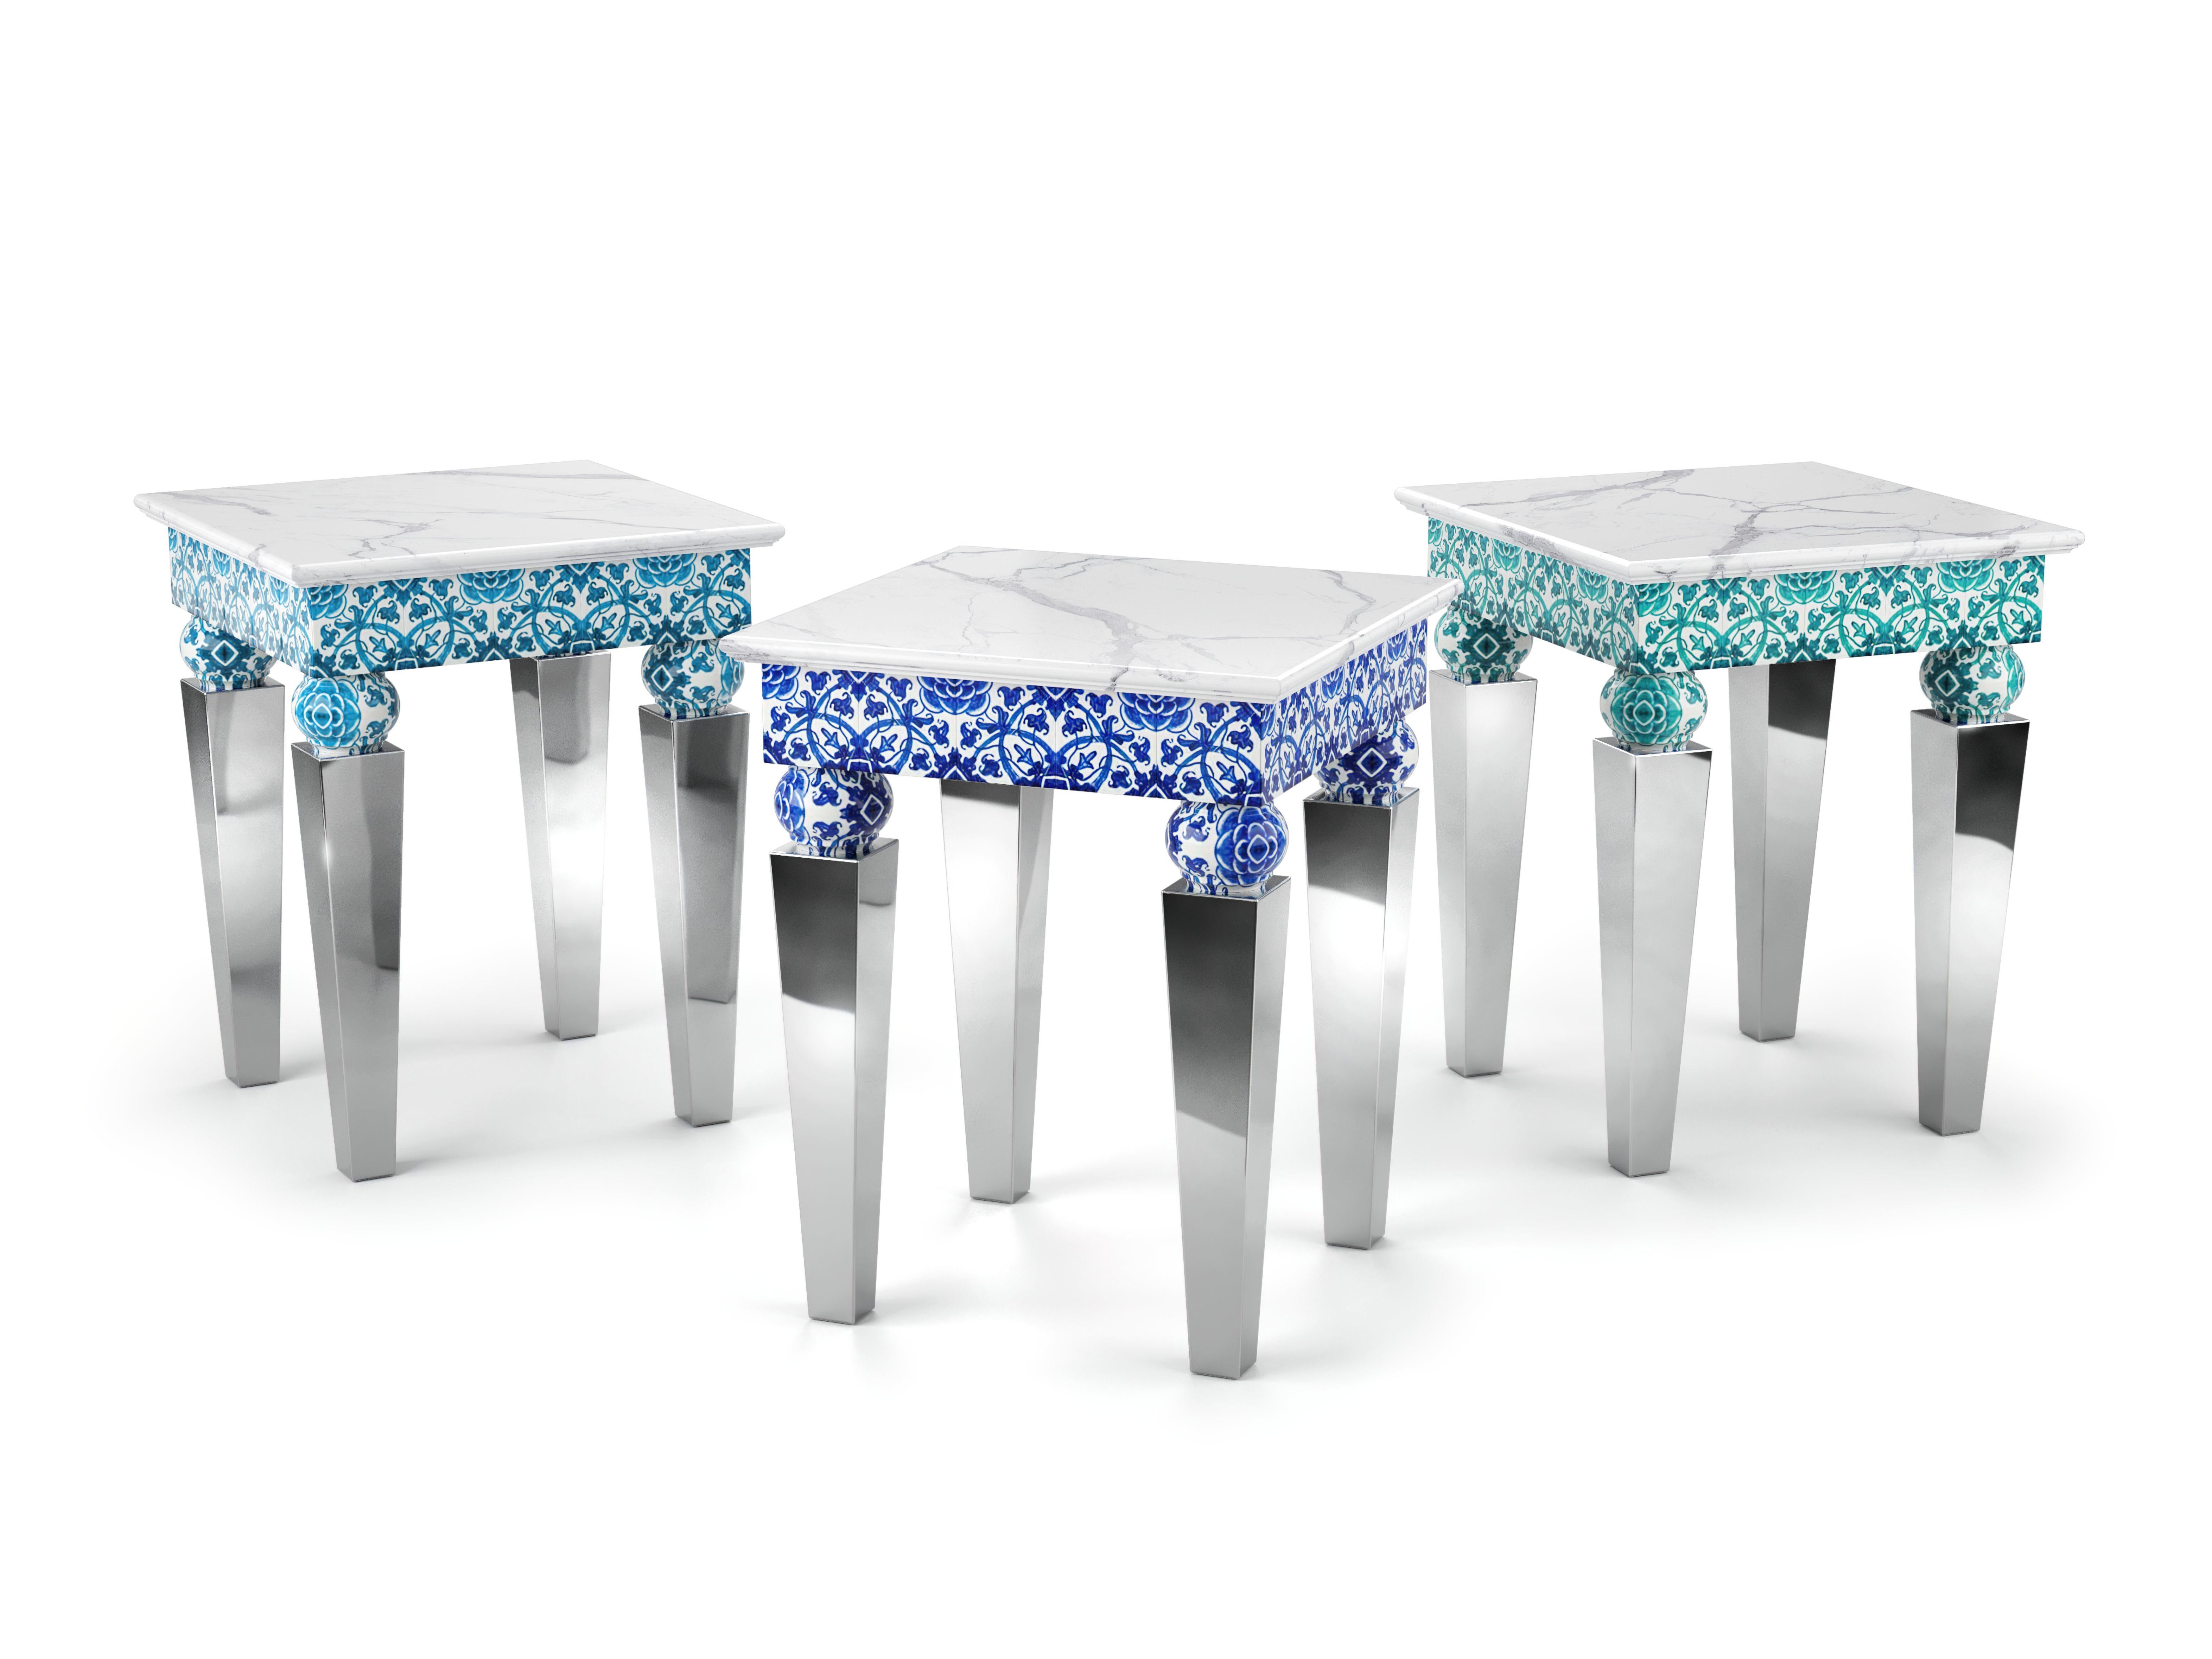 Modern Side Table White Marble Top Mirror Steel Legs, Blue Majolica Tiles Also Outdoor For Sale